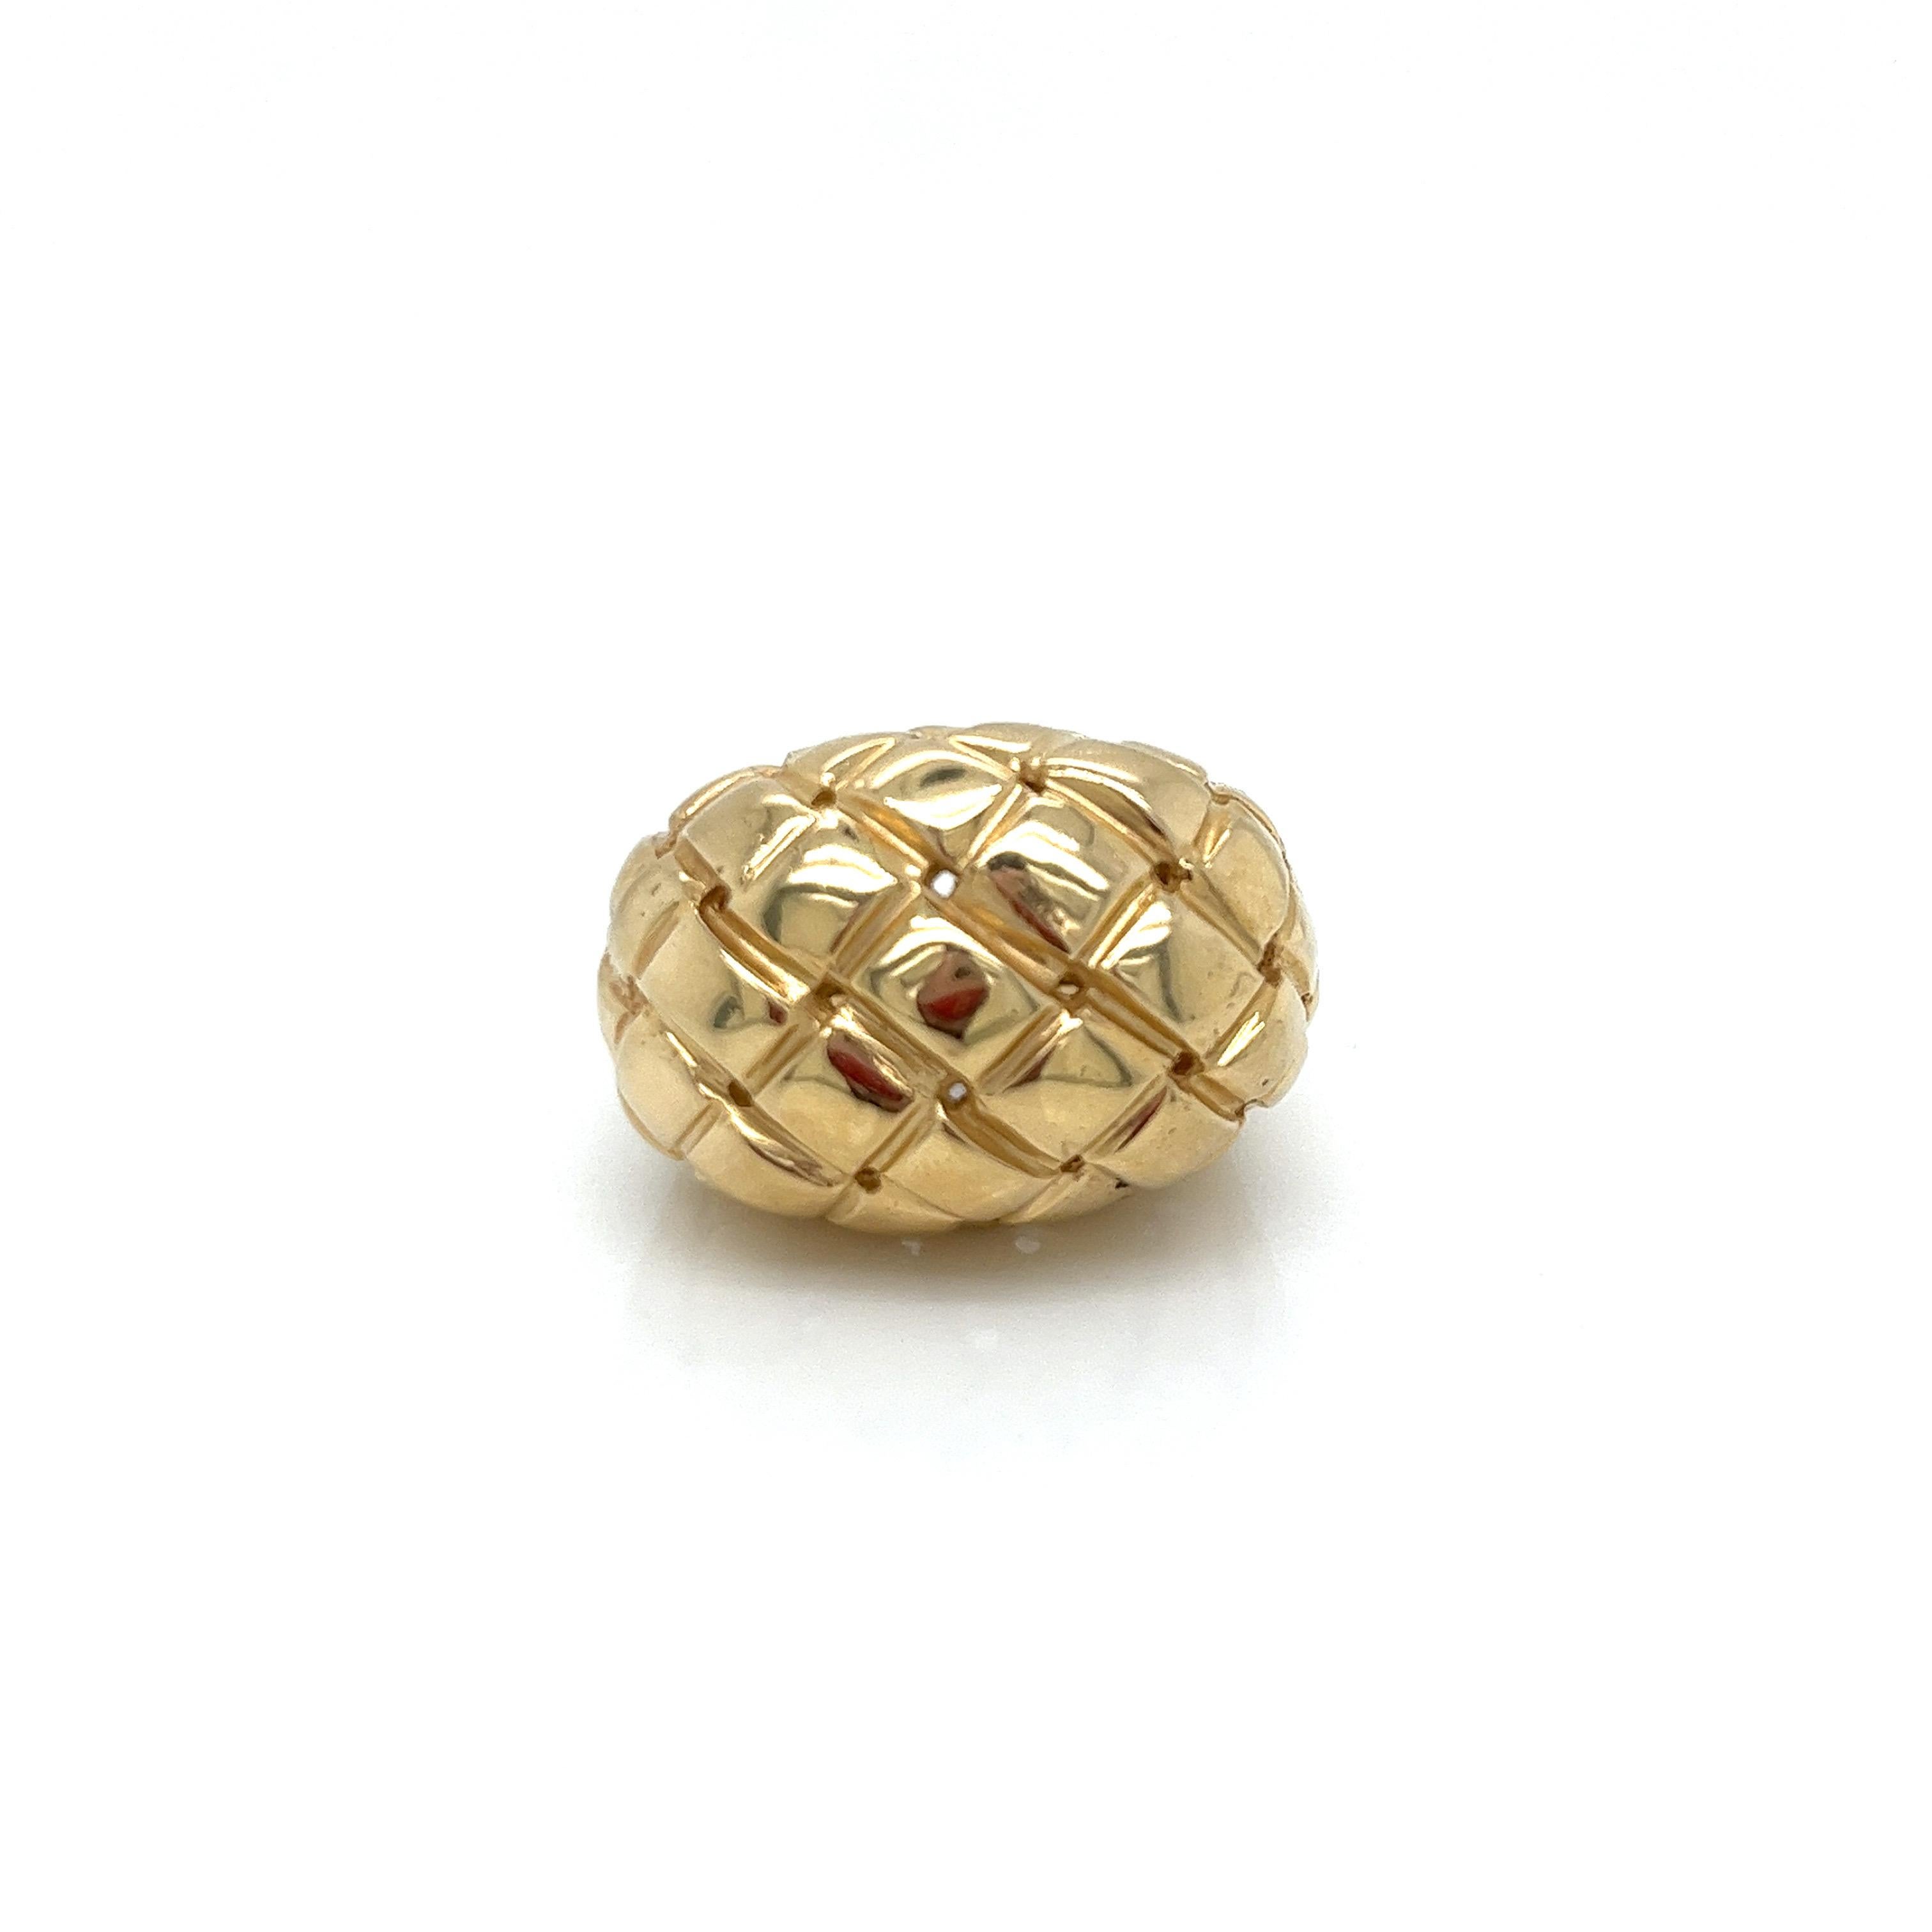 Vintage 1980's 14k Yellow Gold Dome Basket Weave Statement Ring. The basket weave design top of the ring measures 26mm x 18mm and 13mm high off the finger. The bandon the side measures 11mm and tapers down to 5.1mm wide on the bottom. The ring